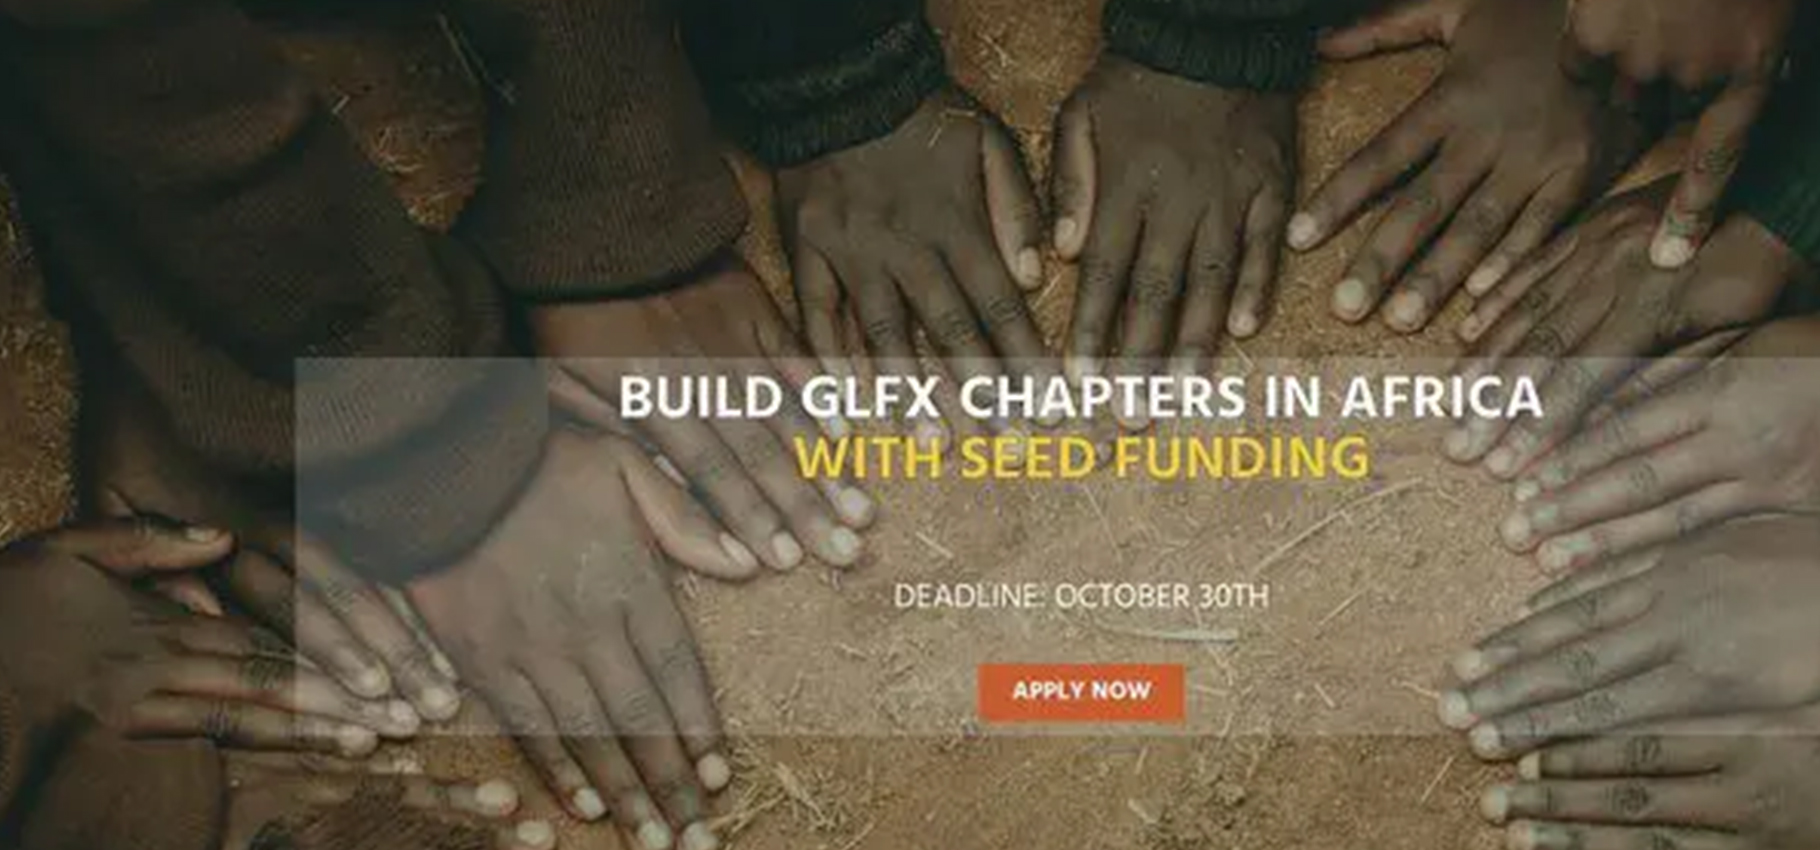 Grab the opportunity to win 5,000 euros from the GLFx Initiative